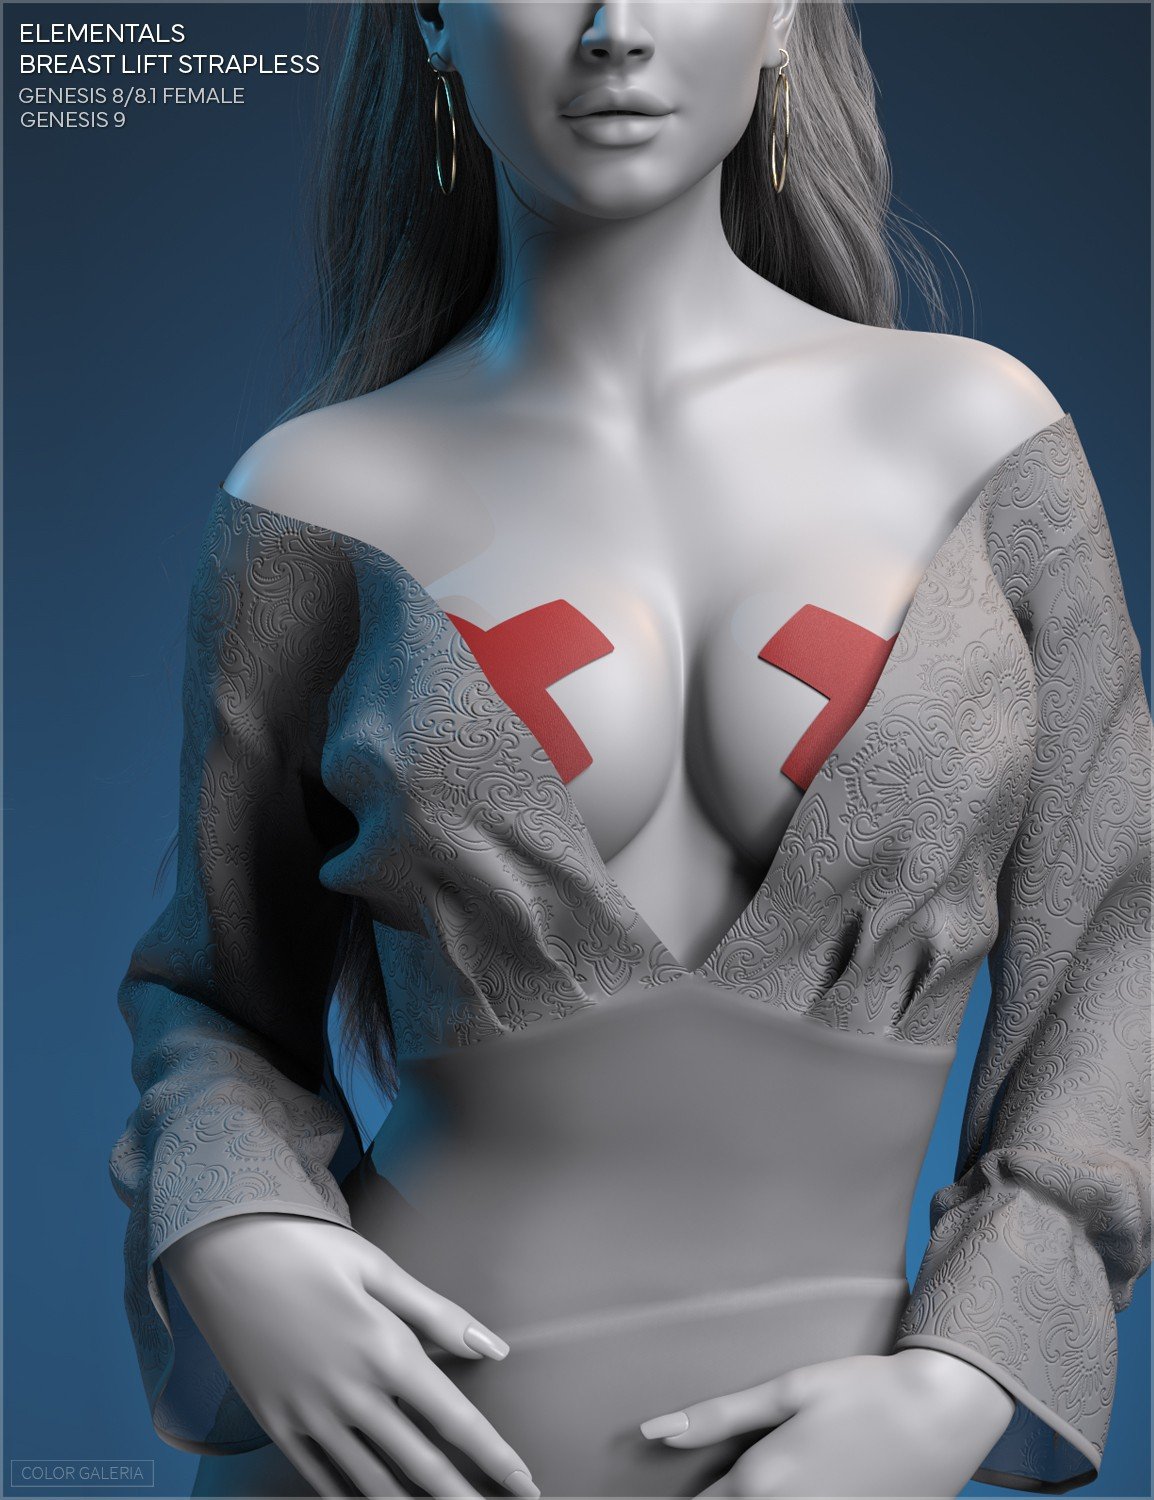 CGI Elementals - Breast Lift Strapless for Genesis 8-8.1F and Genesis 9 by: Color Galeria, 3D Models by Daz 3D